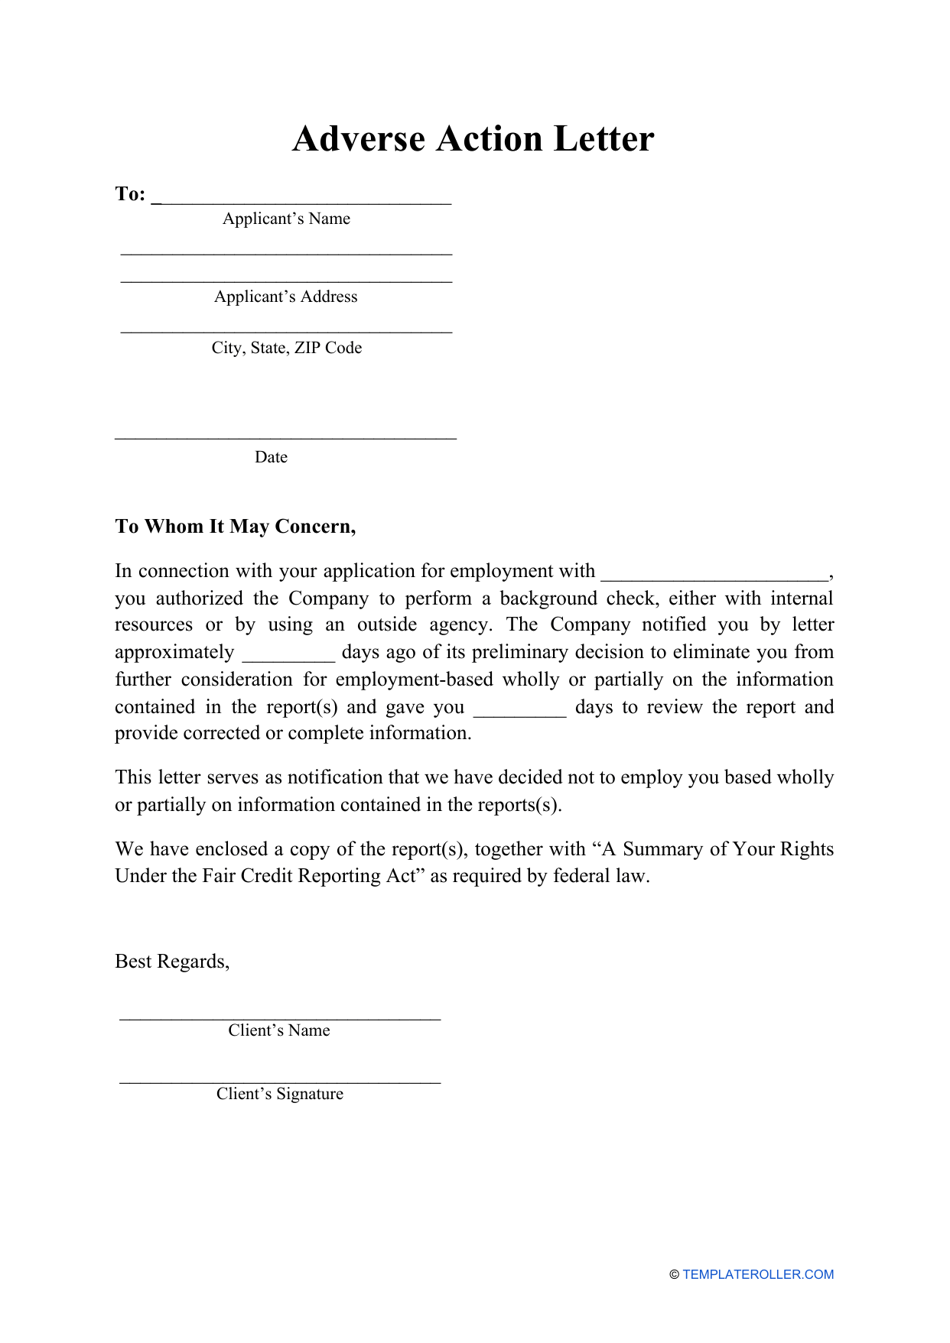 Adverse Action Letter Template Download Printable PDF | Templateroller